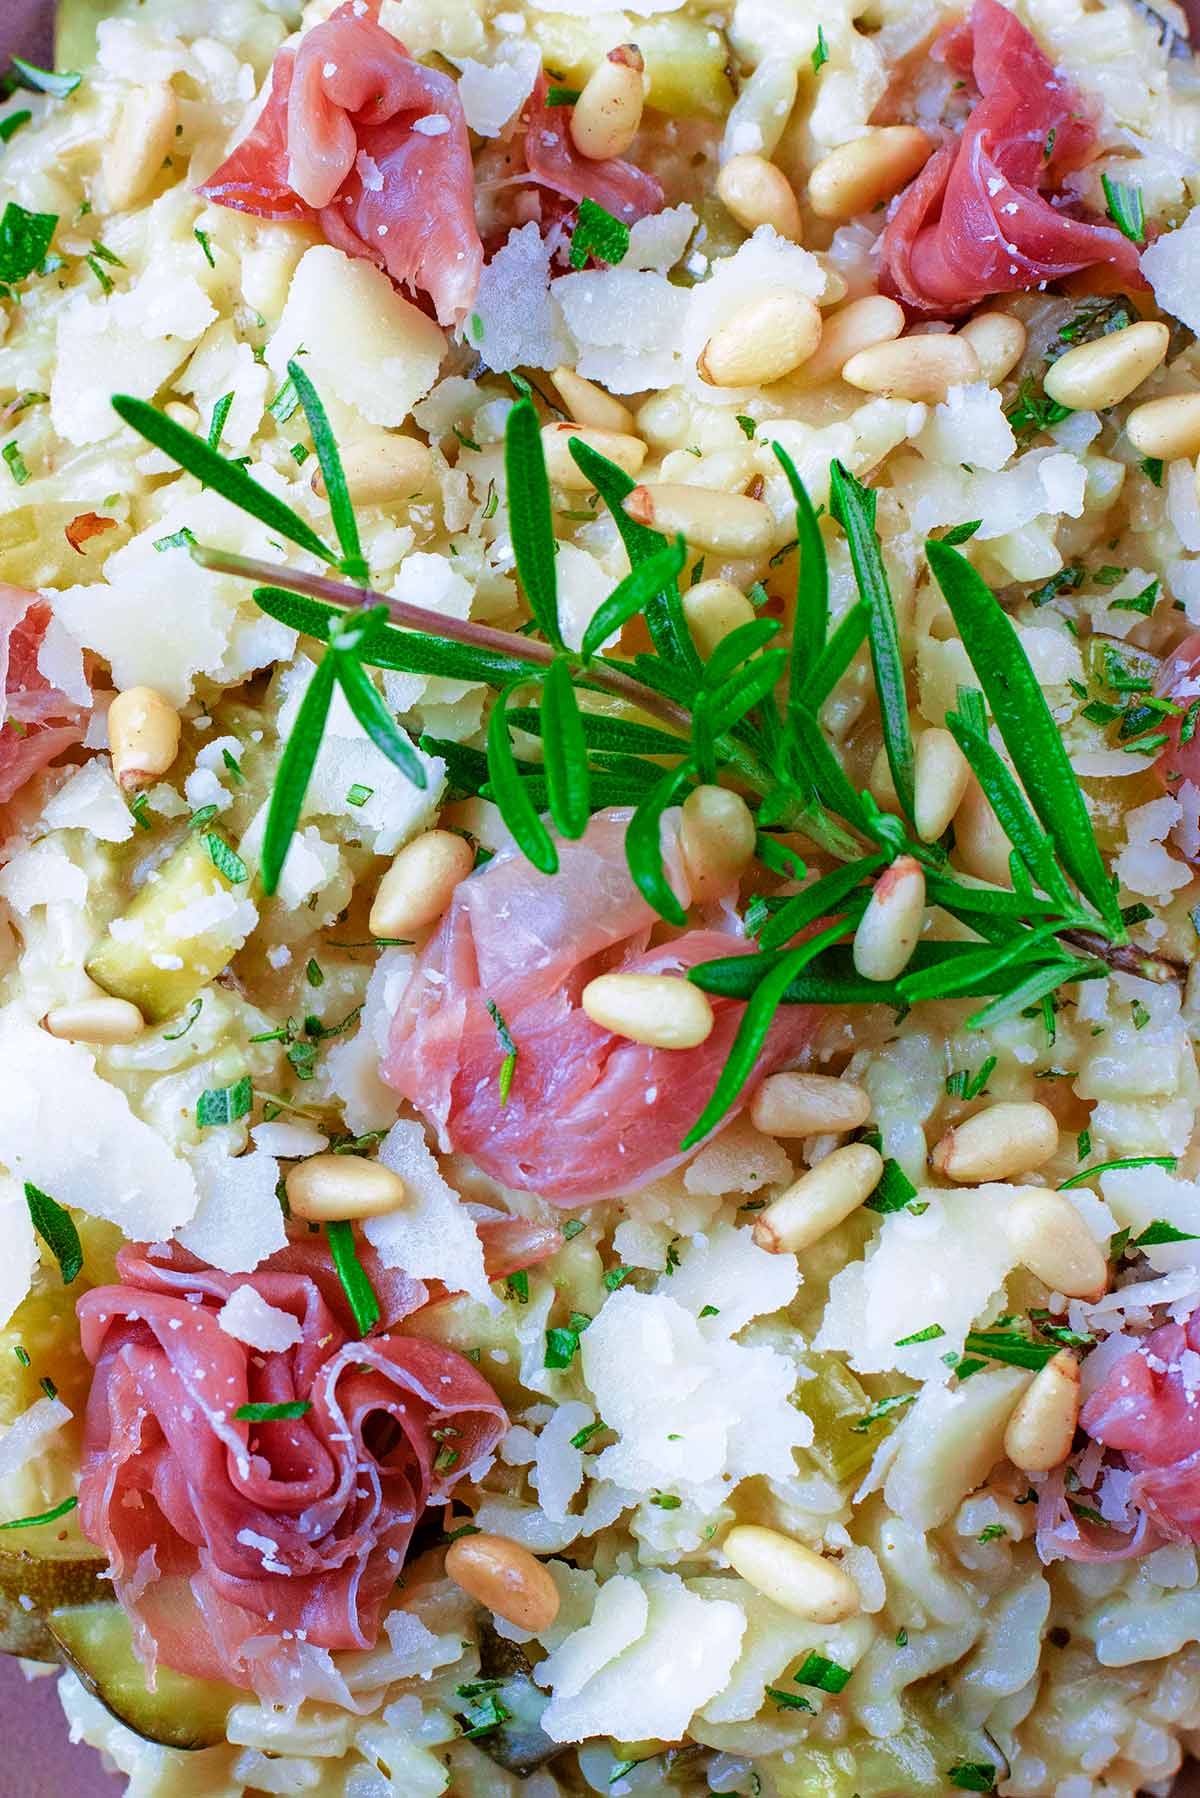 A sprig of rosemary and some curled up Parma ham sat upon courgette risotto.